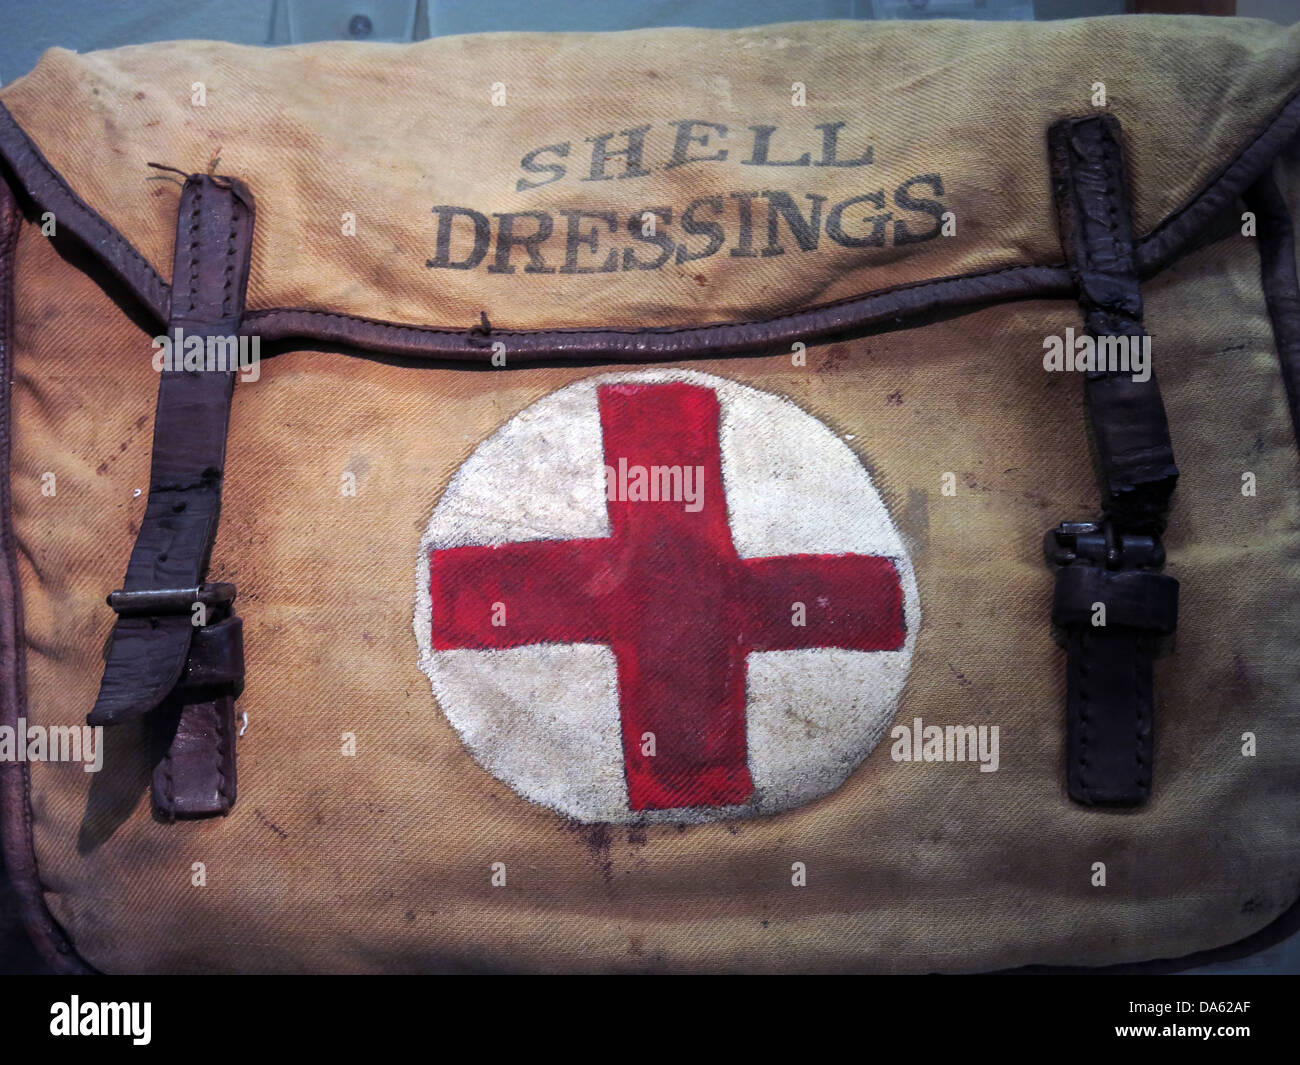 World War 1 Shell dressings bag with a red cross on a white background Stock Photo